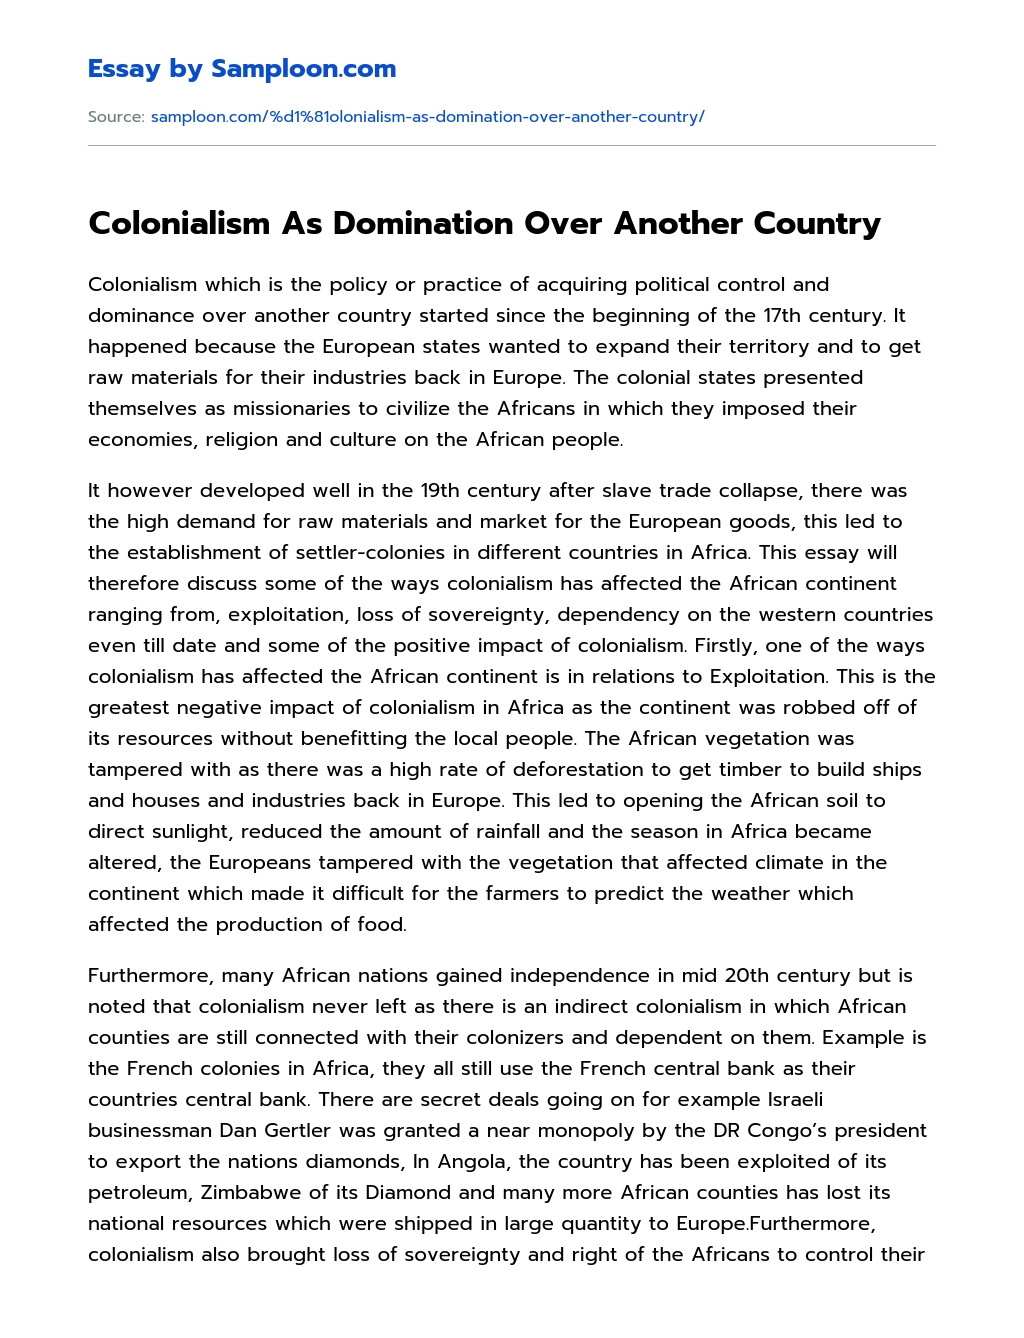 Сolonialism As Domination Over Another Country essay